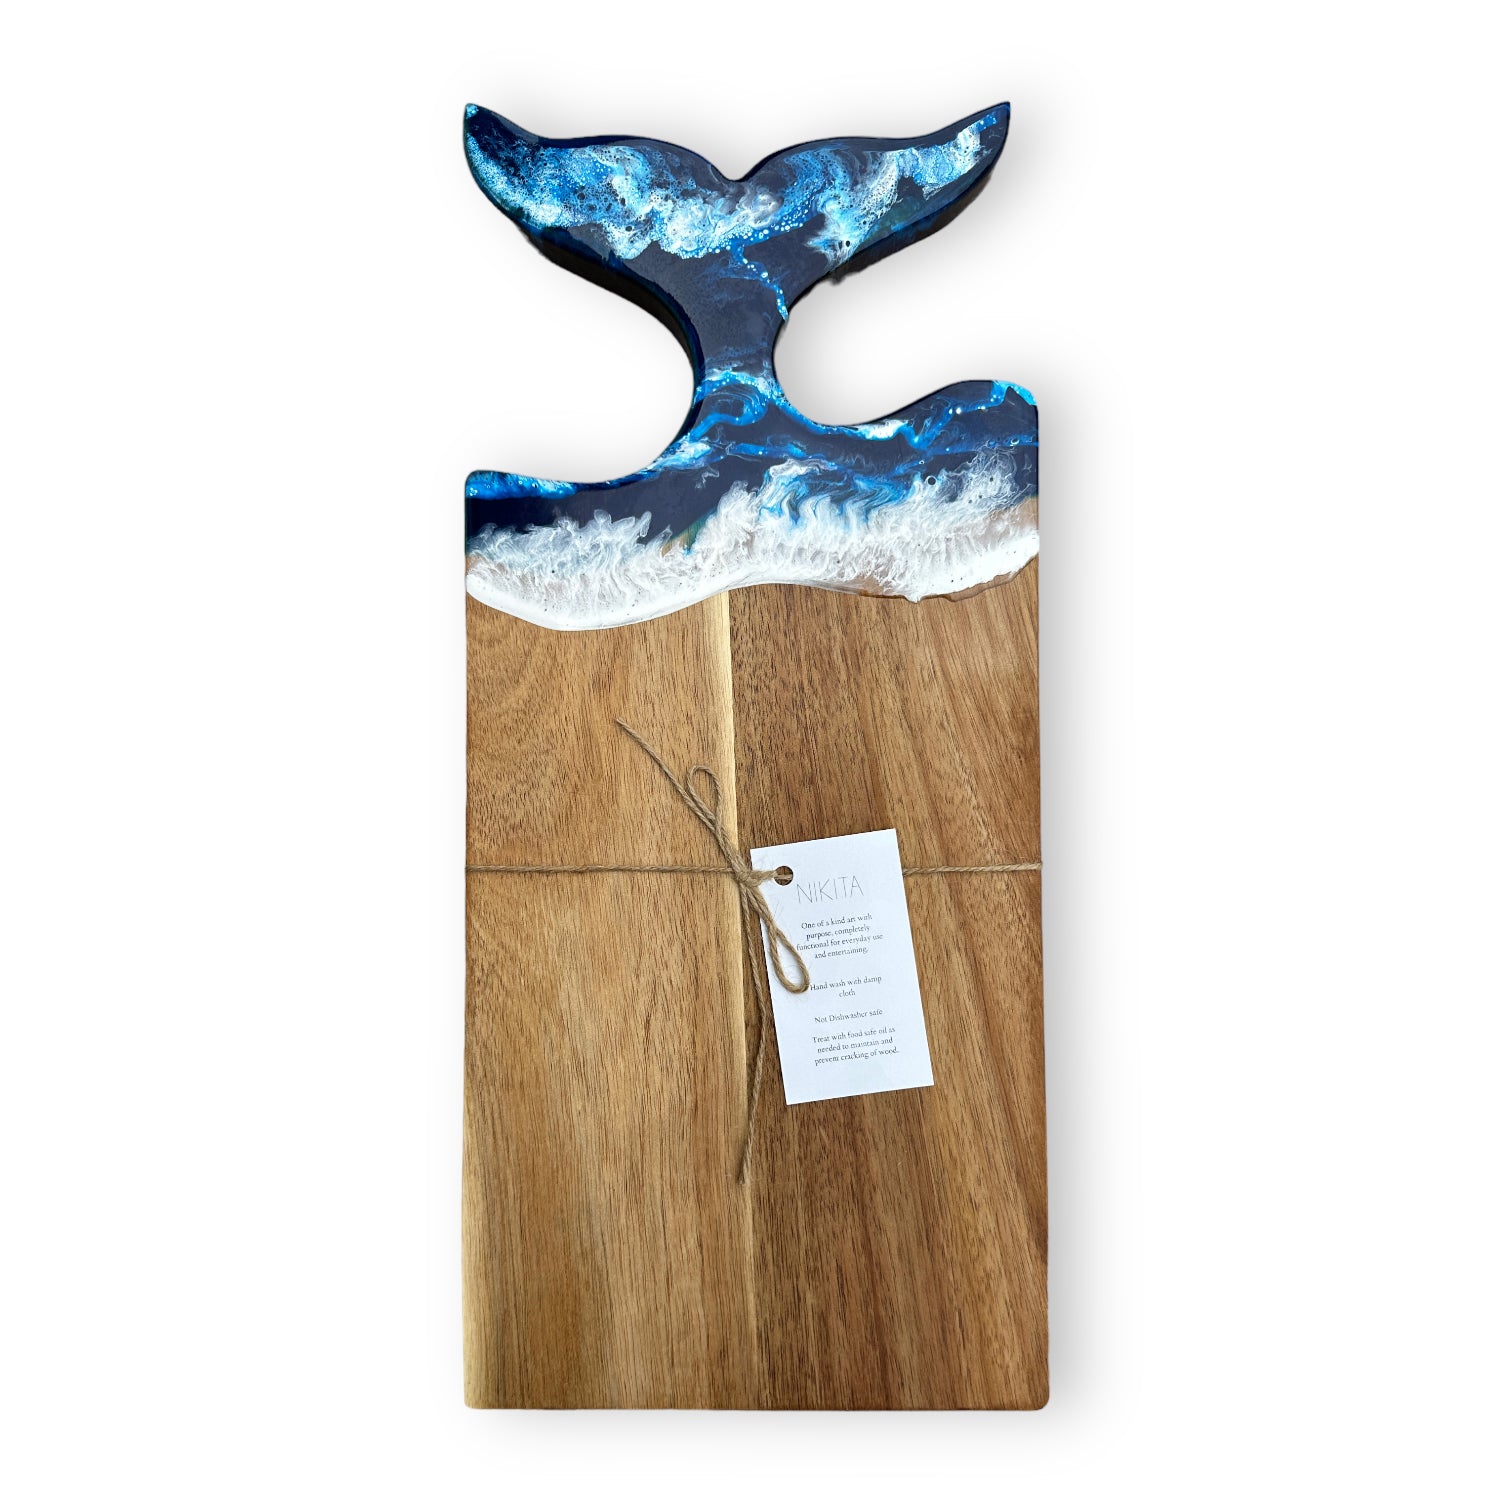 have-your-favorite-sports-teams-deep-blue-acacia-wood-whale-tail-charcuterie-board-17-in-a-discount_0.jpg